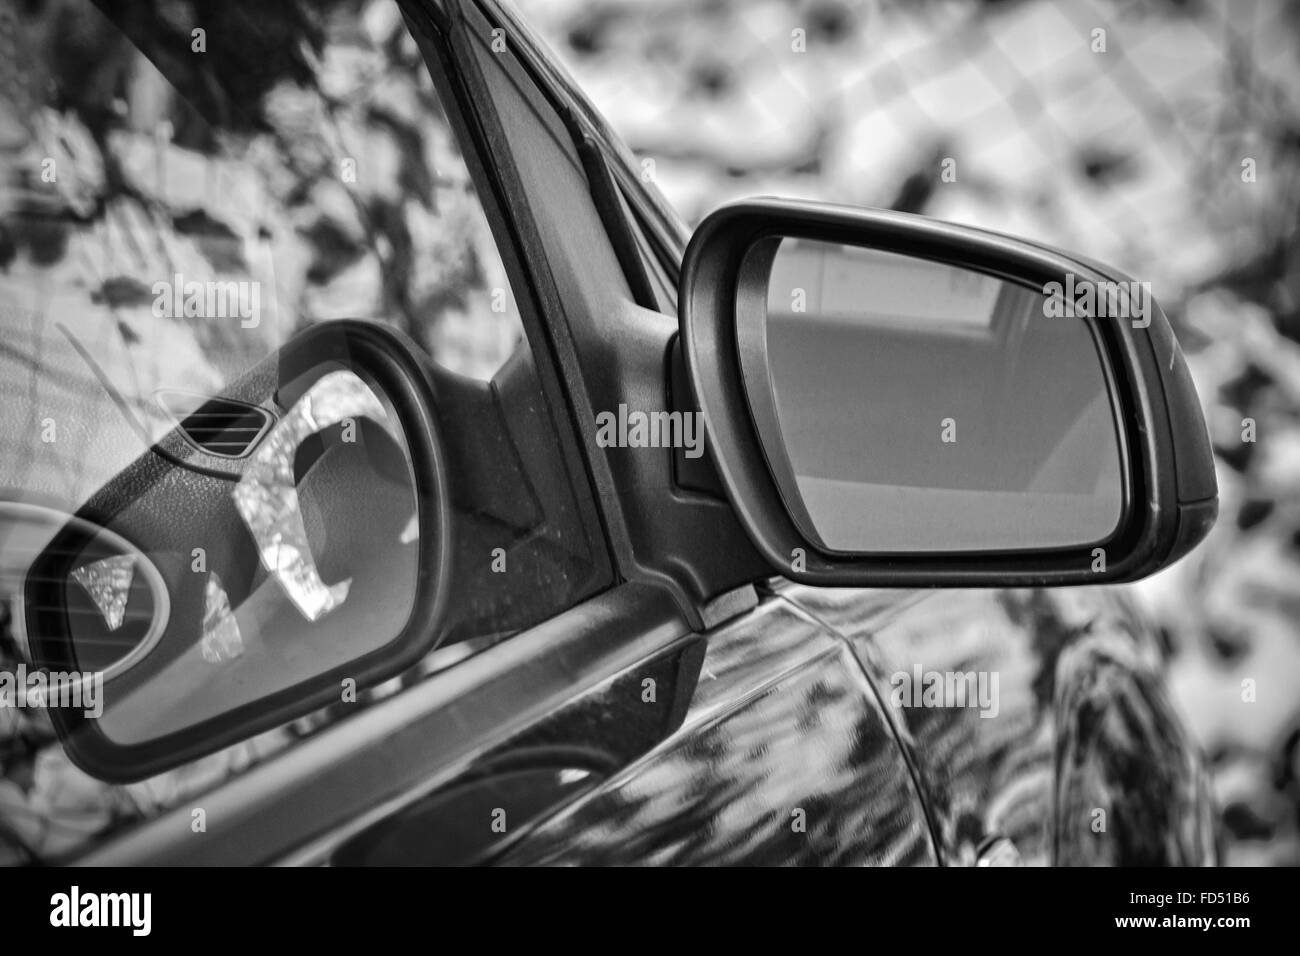 Closeup of a car rear-view mirror in black and white colors Stock Photo